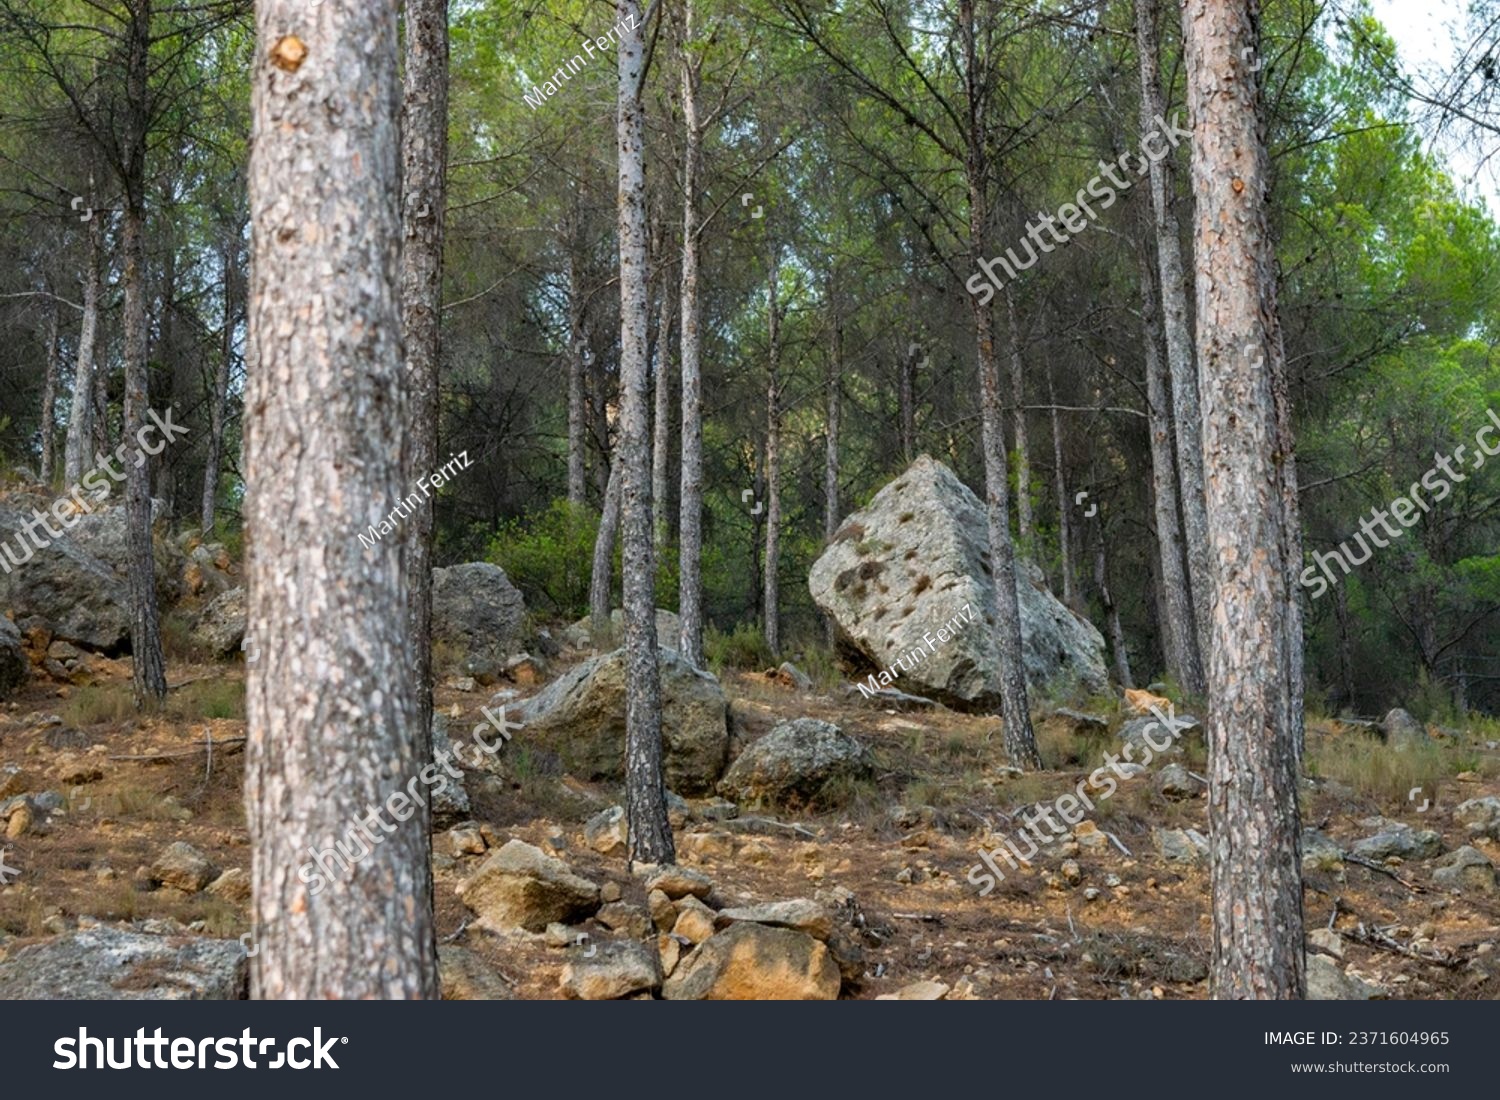 Large rock with edges and smooth parts seen in the distance among the trees in the forest of La Muela mountain in Rincón de Ademuz on the Iberian Peninsula #2371604965